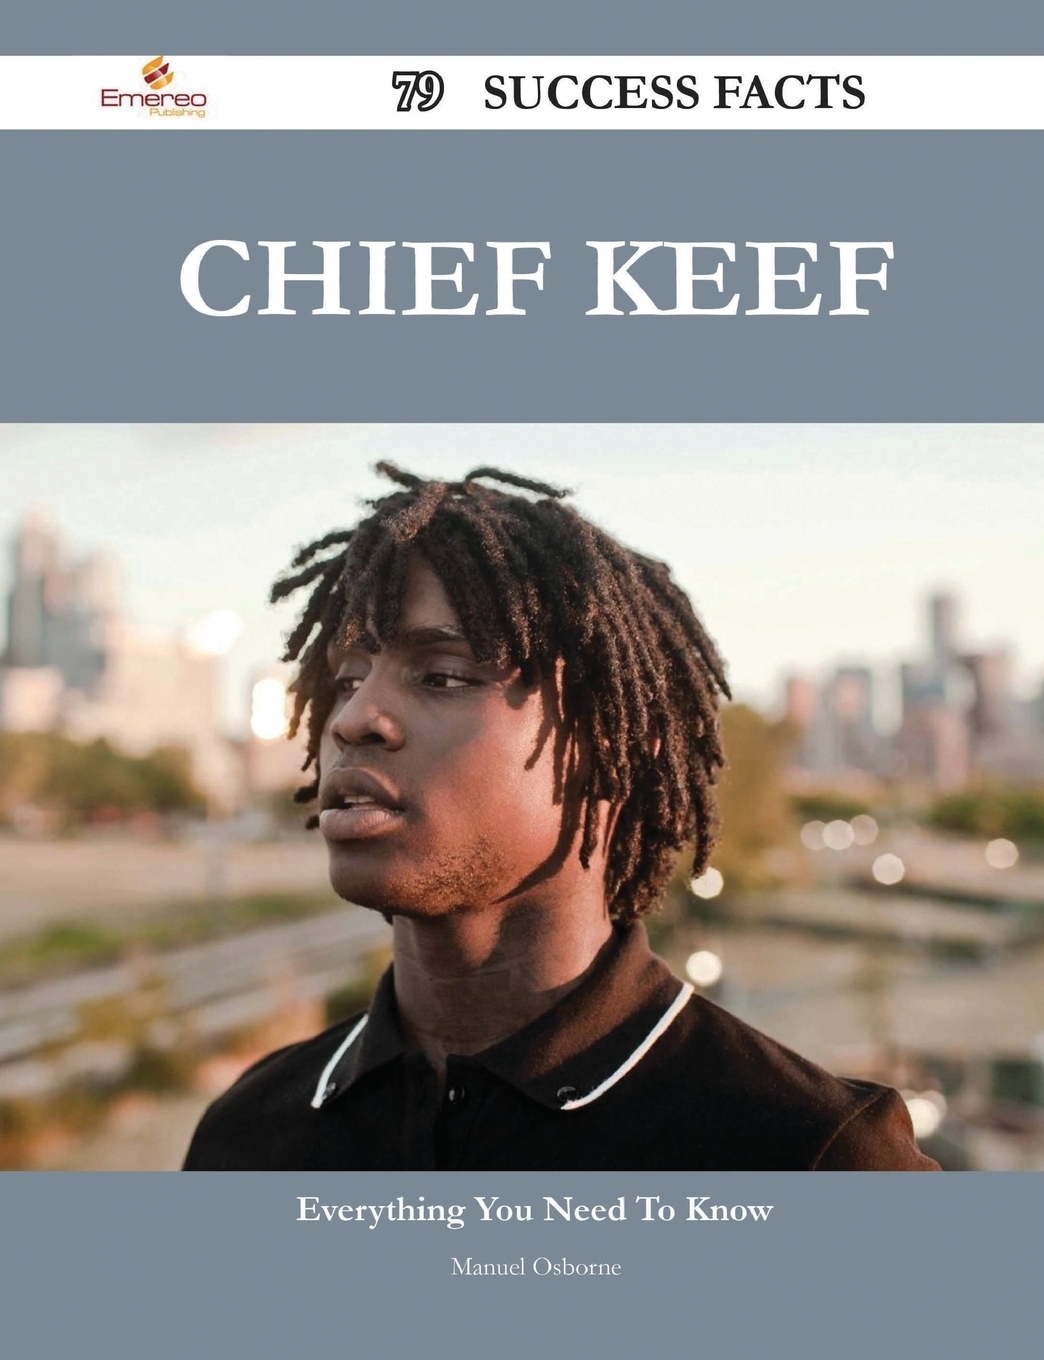 Chief Keef 79 Success Facts - Everything you need to know about Chief Keef.